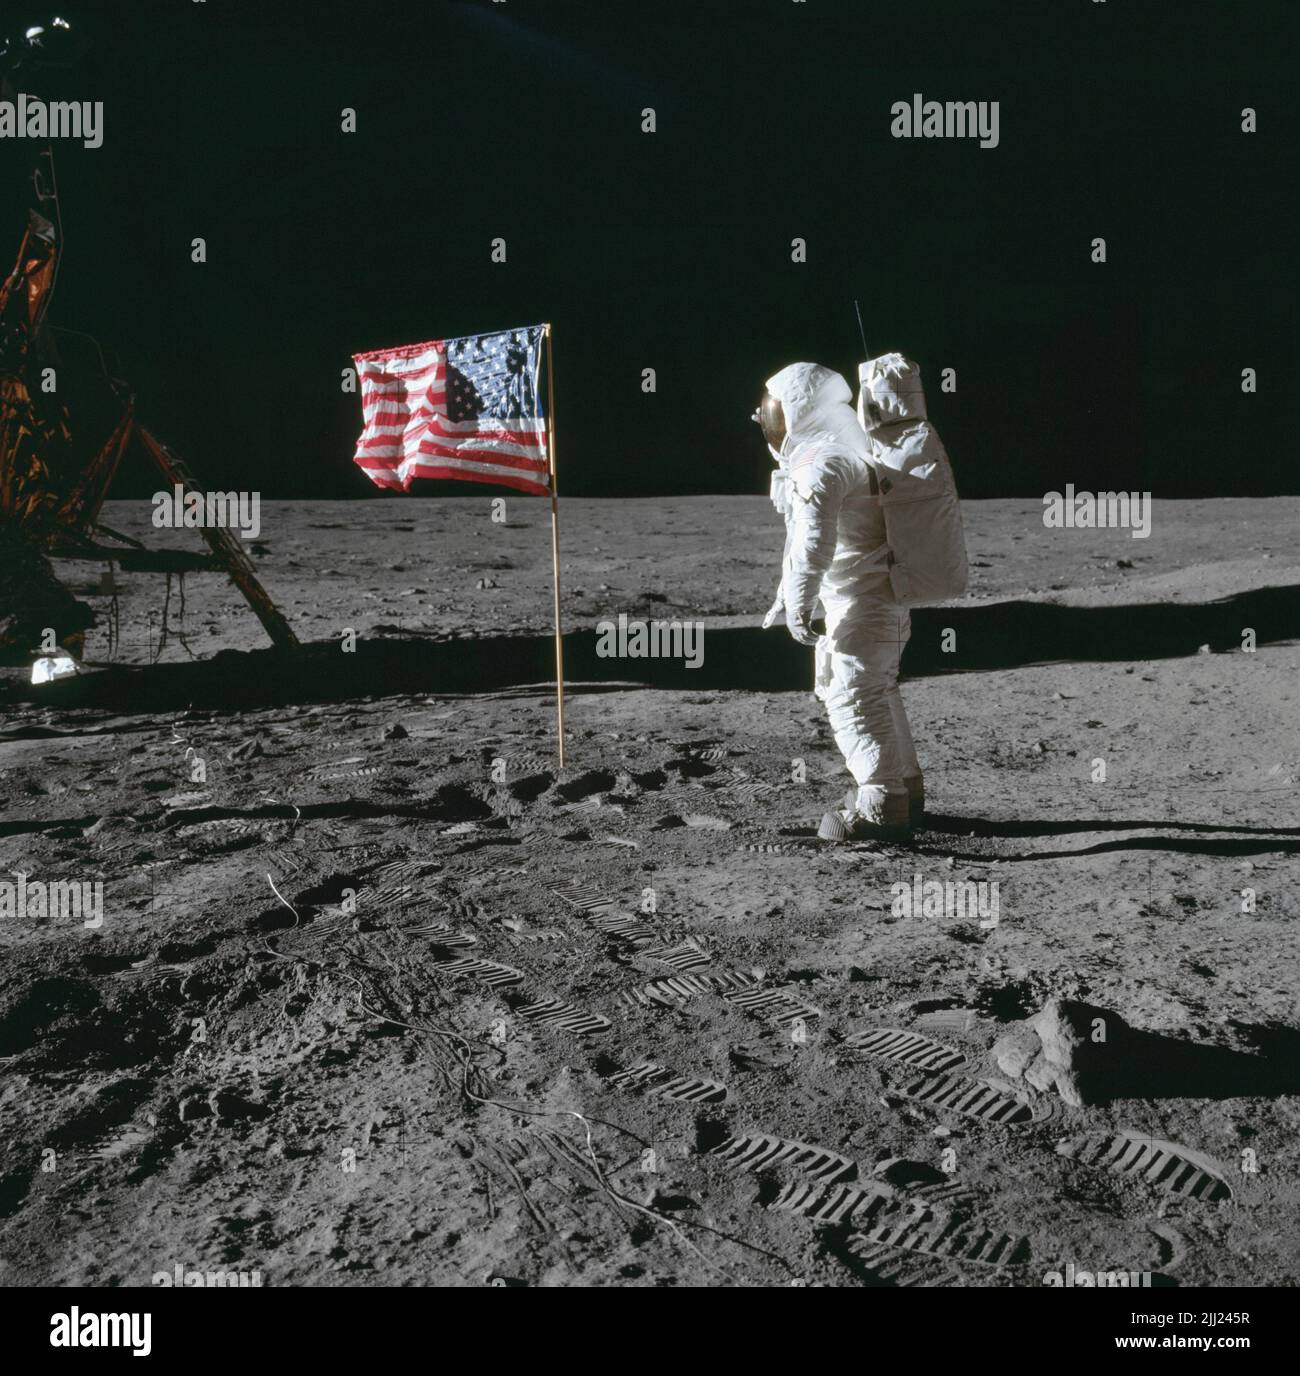 Flag Day is celebrated on June 14 each year and commemorates the adoption of the flag of the United States on June 14, 1777, by the Second Continental Congress.  NASA flies the U.S. flag on its missions throughout our solar system.  In this iconic image from the Apollo 11 lunar landing, Commander Neil Armstrong snapped this picture of Buzz Aldrin saluting the flag at Tranquility Base.  Learn More Gallery: The American Flag in U.S. Missions Flying High: The Stars and Stripes in Space  Image Credit: NASA Last Updated: Jun 14, 2022 Editor: Yvette Smith Stock Photo